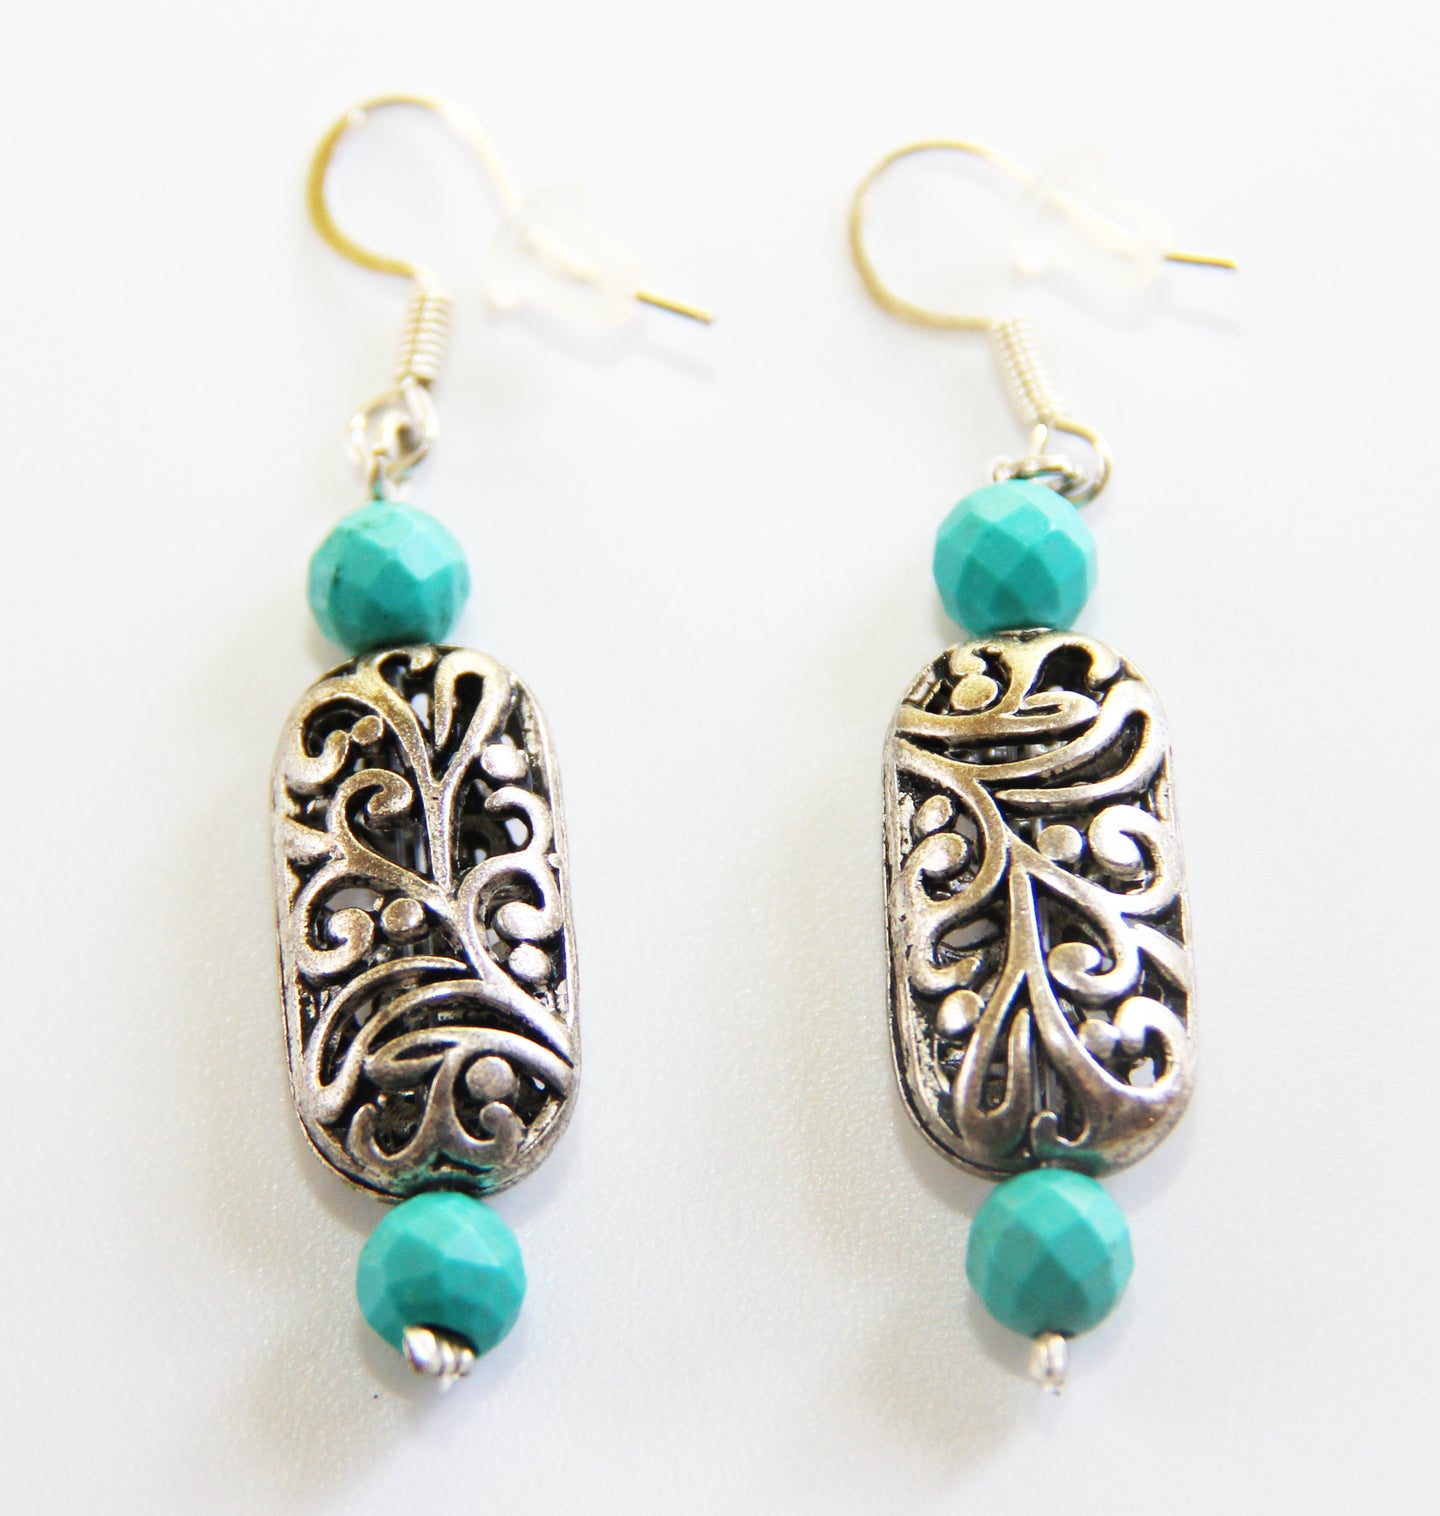 Sexy Cool Braised Silver Pewter & Turquoise Earrings